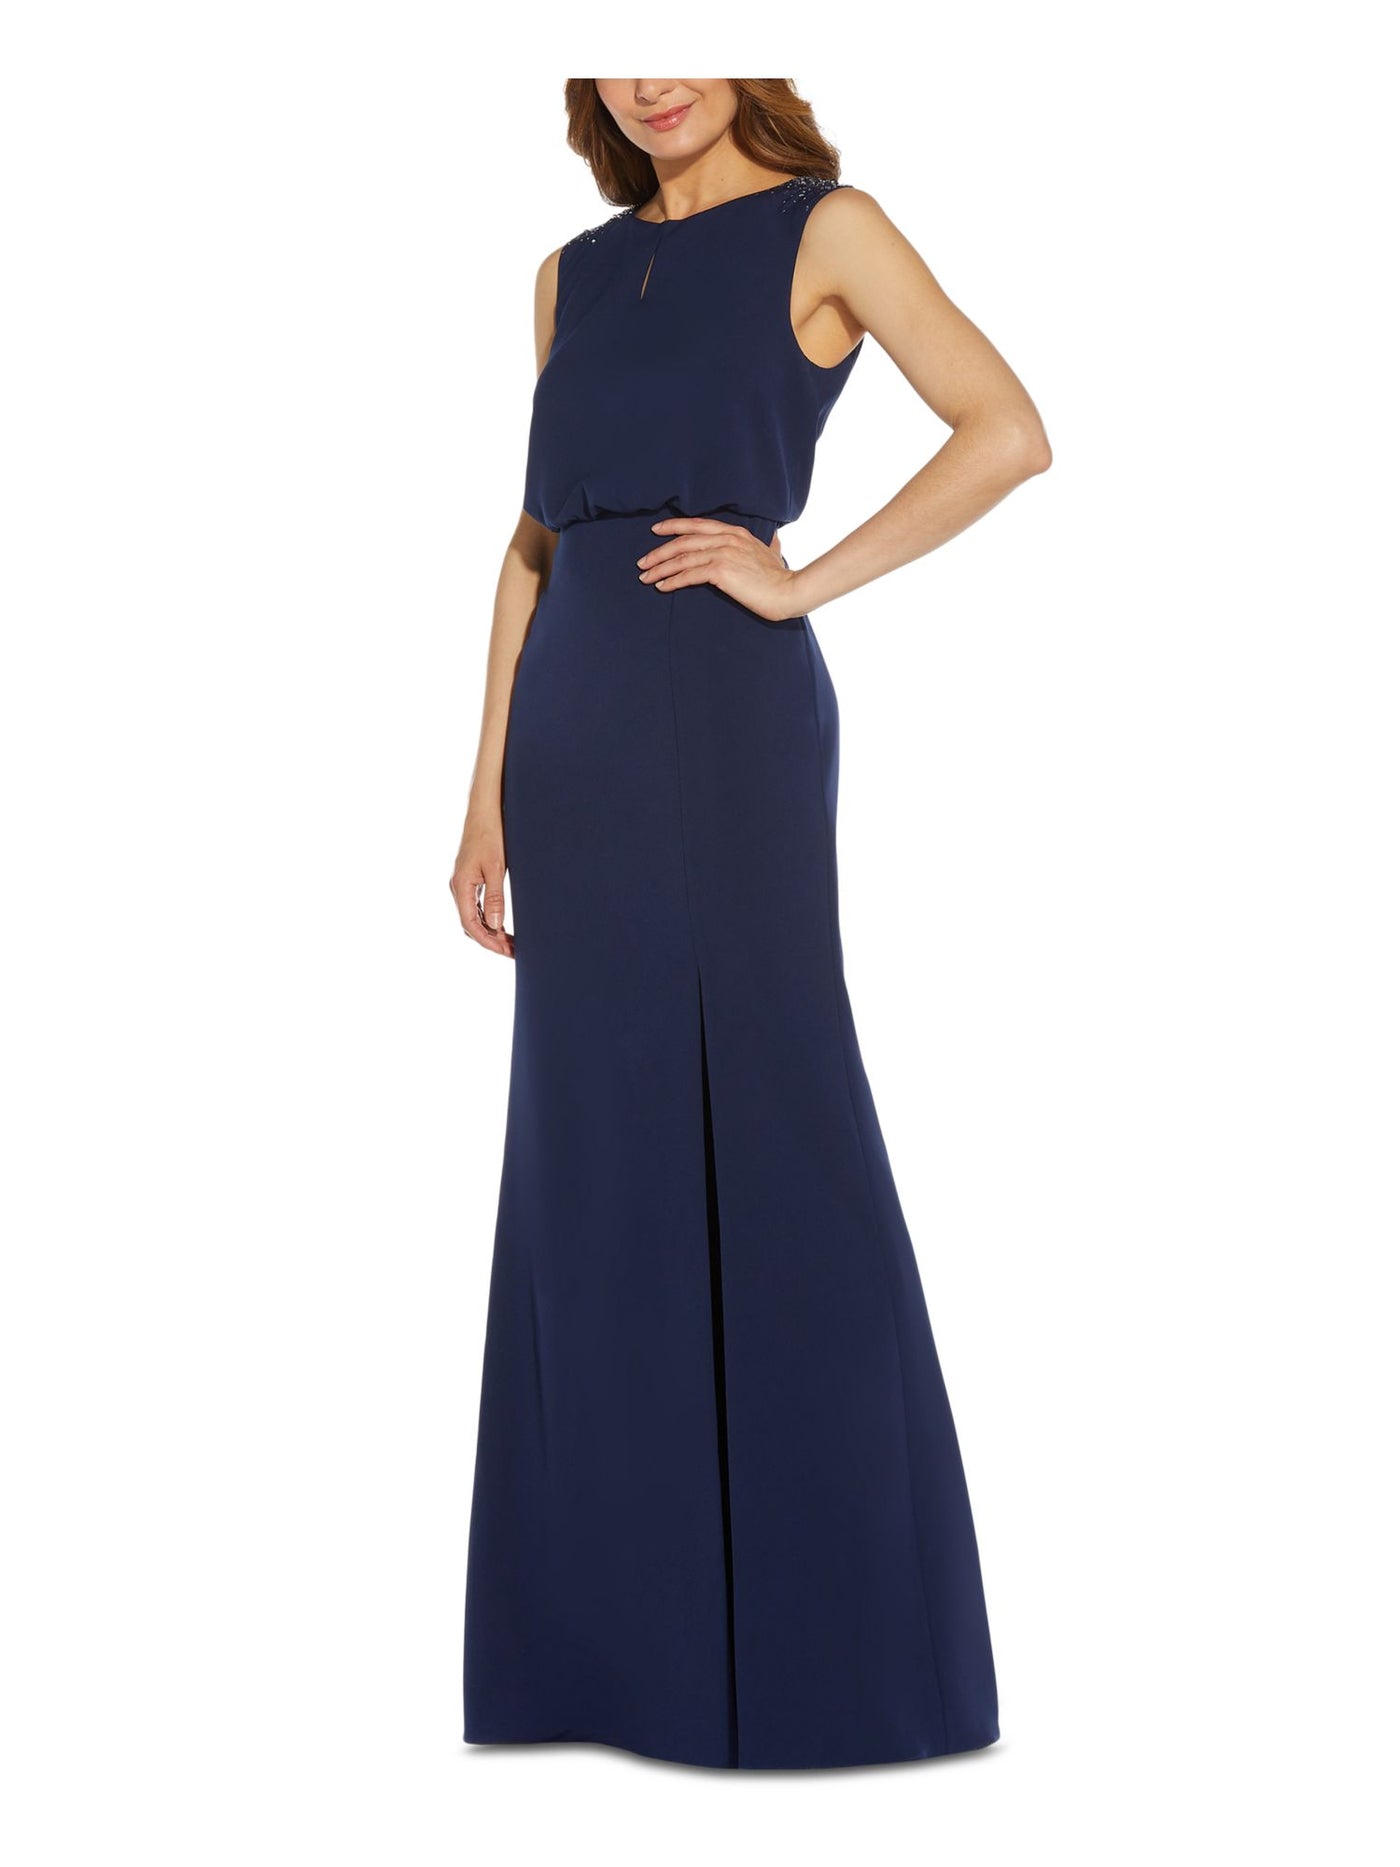 ADRIANNA PAPELL Womens Navy Stretch Embellished Slitted Keyhole Zippered Lined Sleeveless Boat Neck Maxi Formal Blouson Dress 8